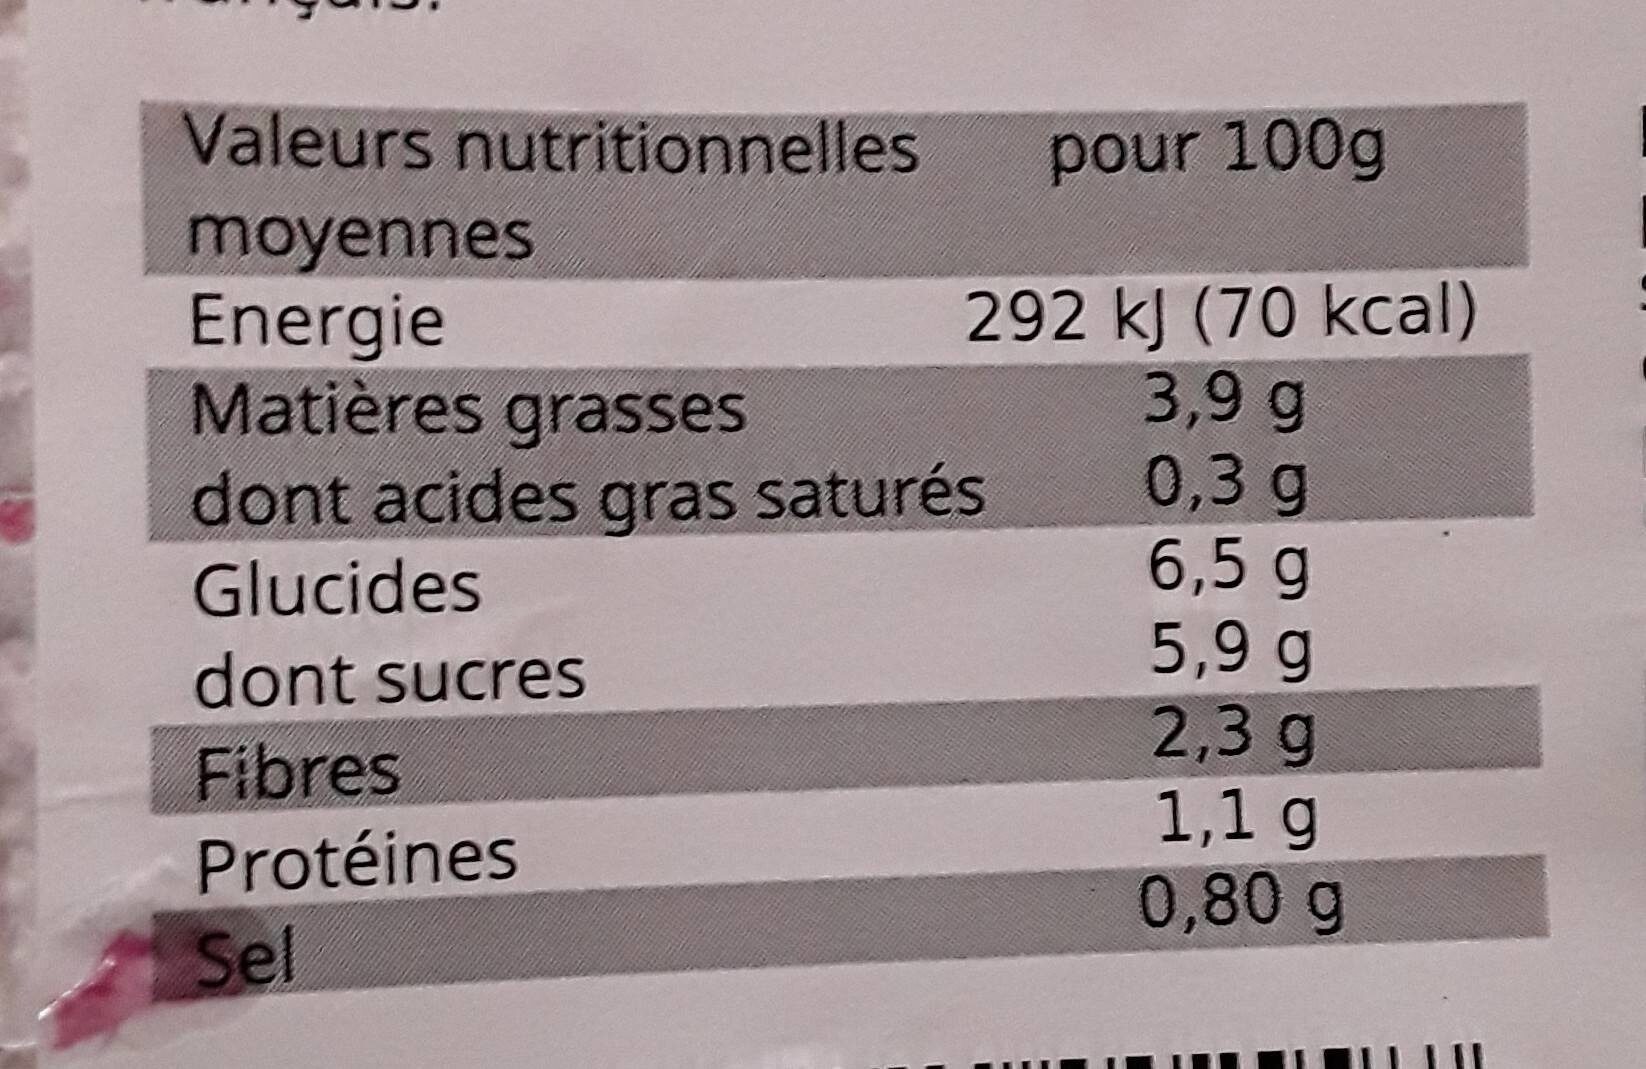 Betteraves rouges - Nutrition facts - fr